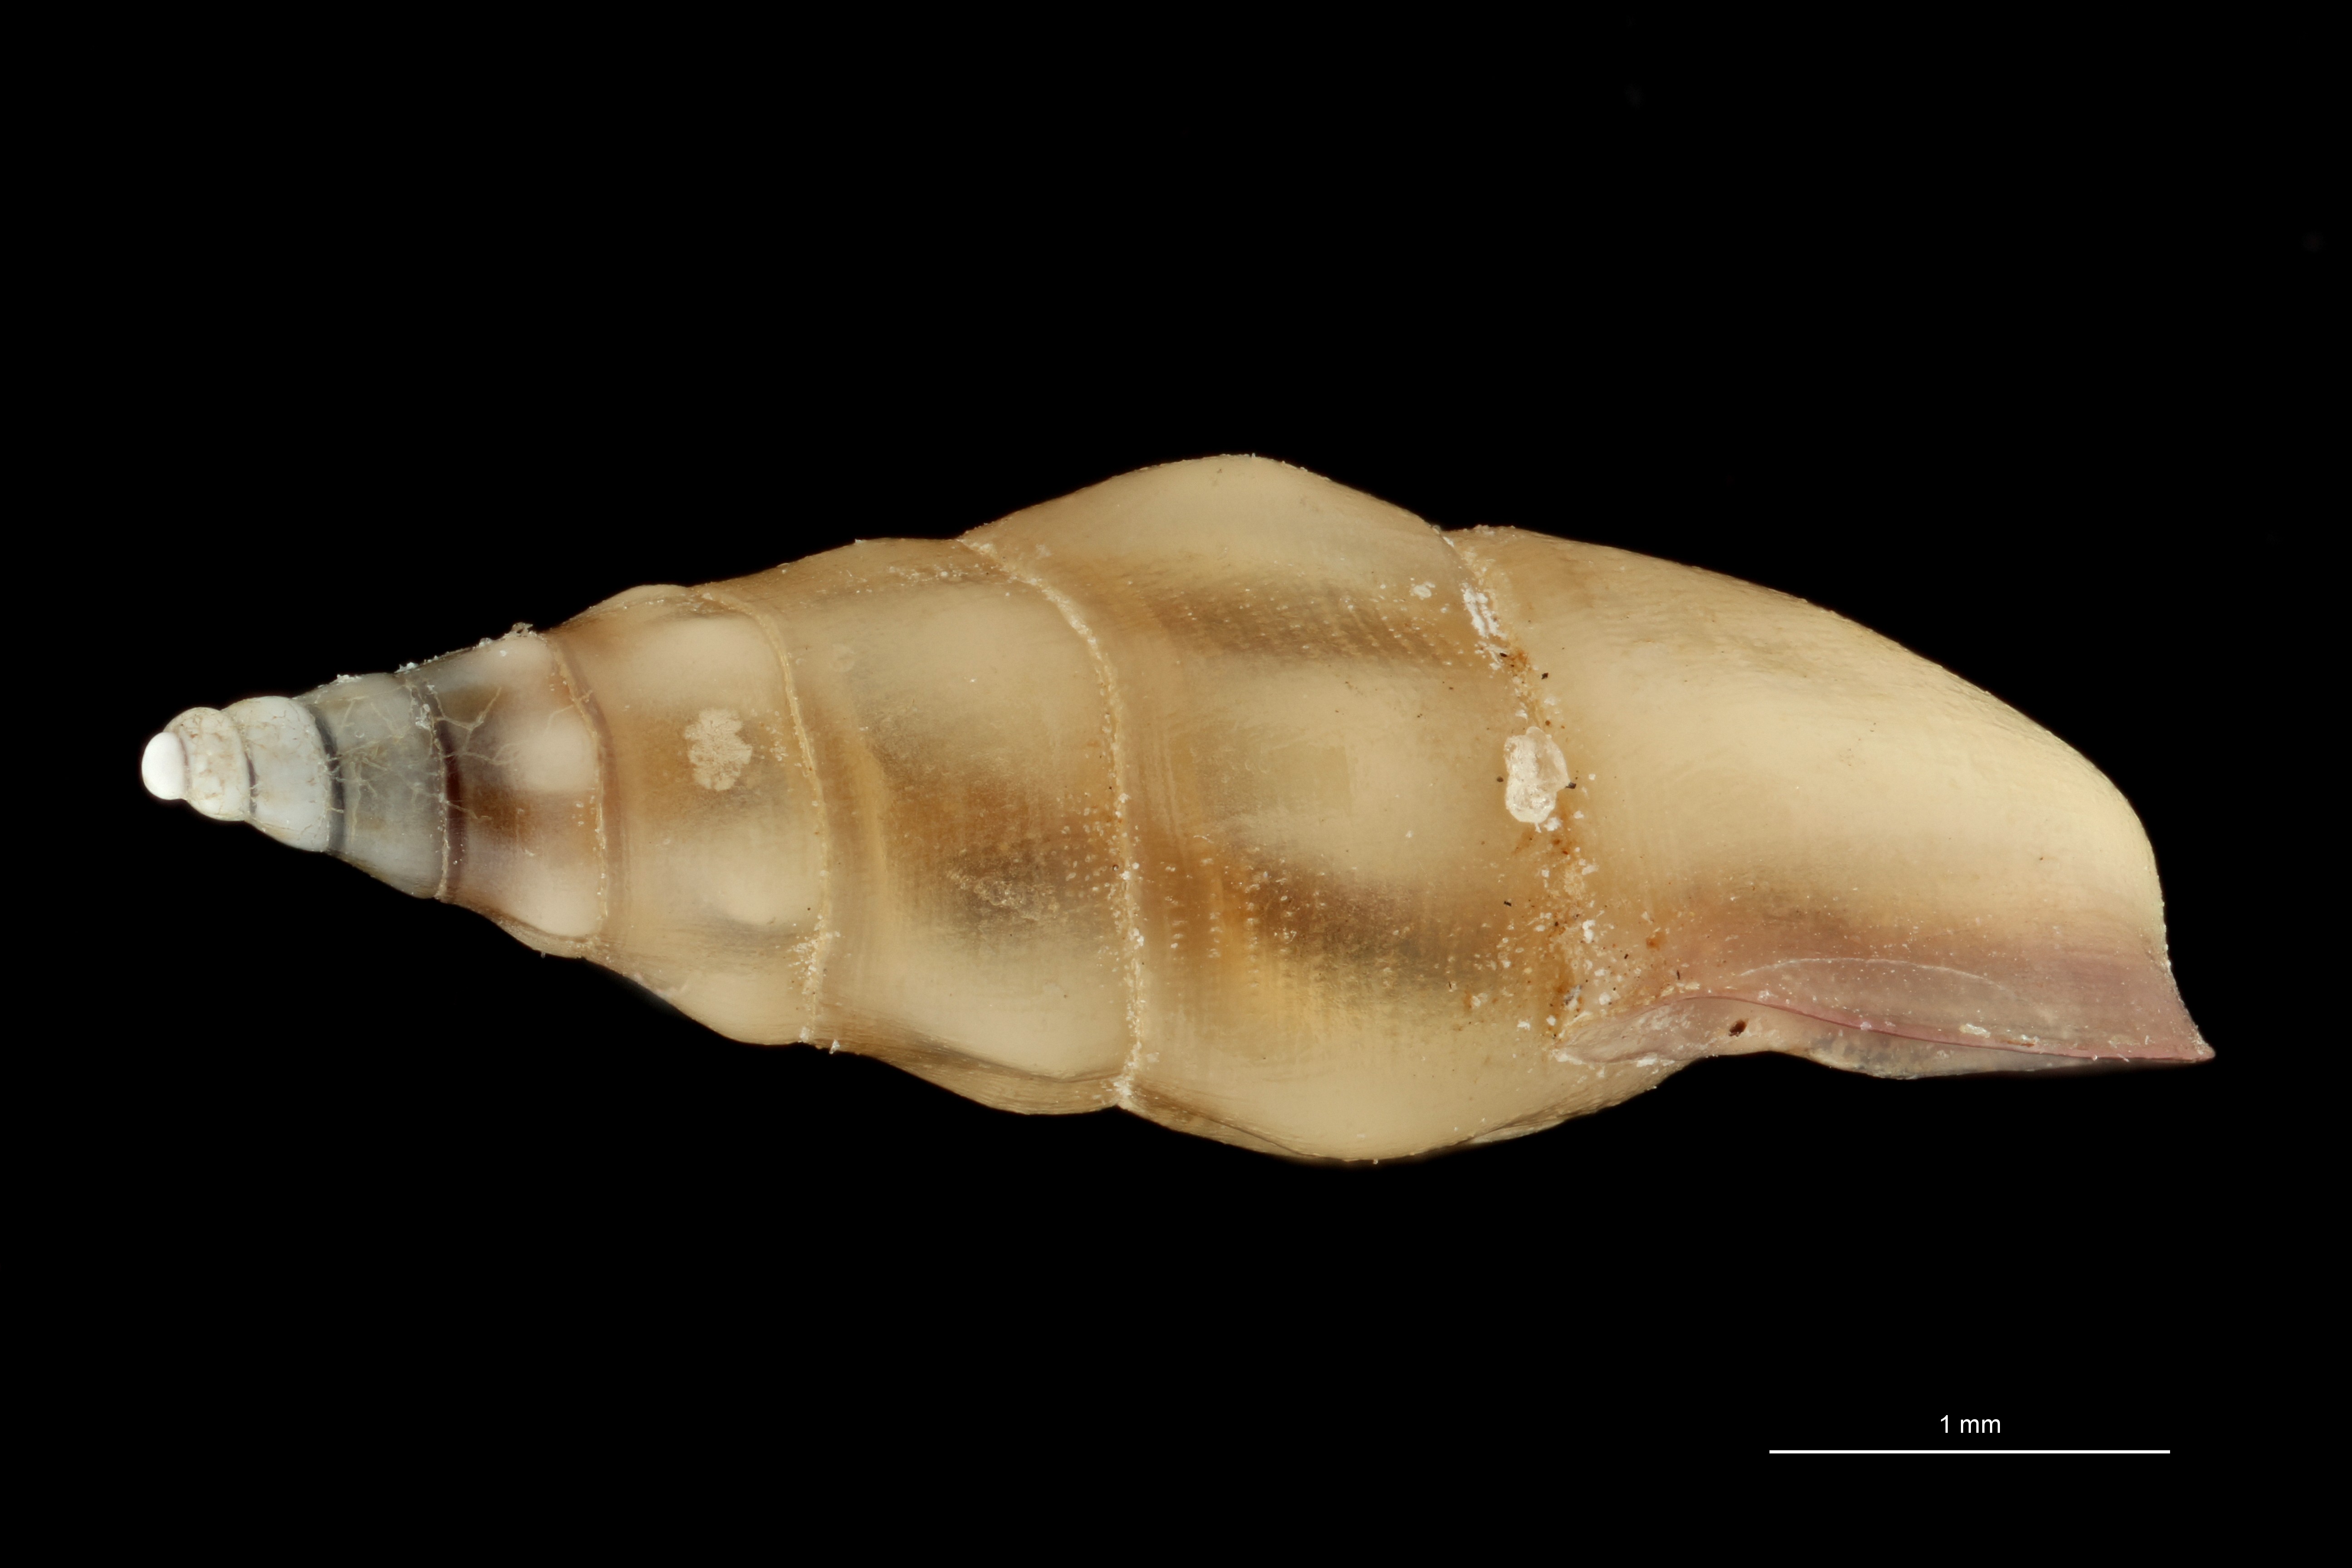 BE-RBINS-INV HOLOTYPE MT 408 Rissoa panhormensis LATERAL ZS PMax Scaled.jpg